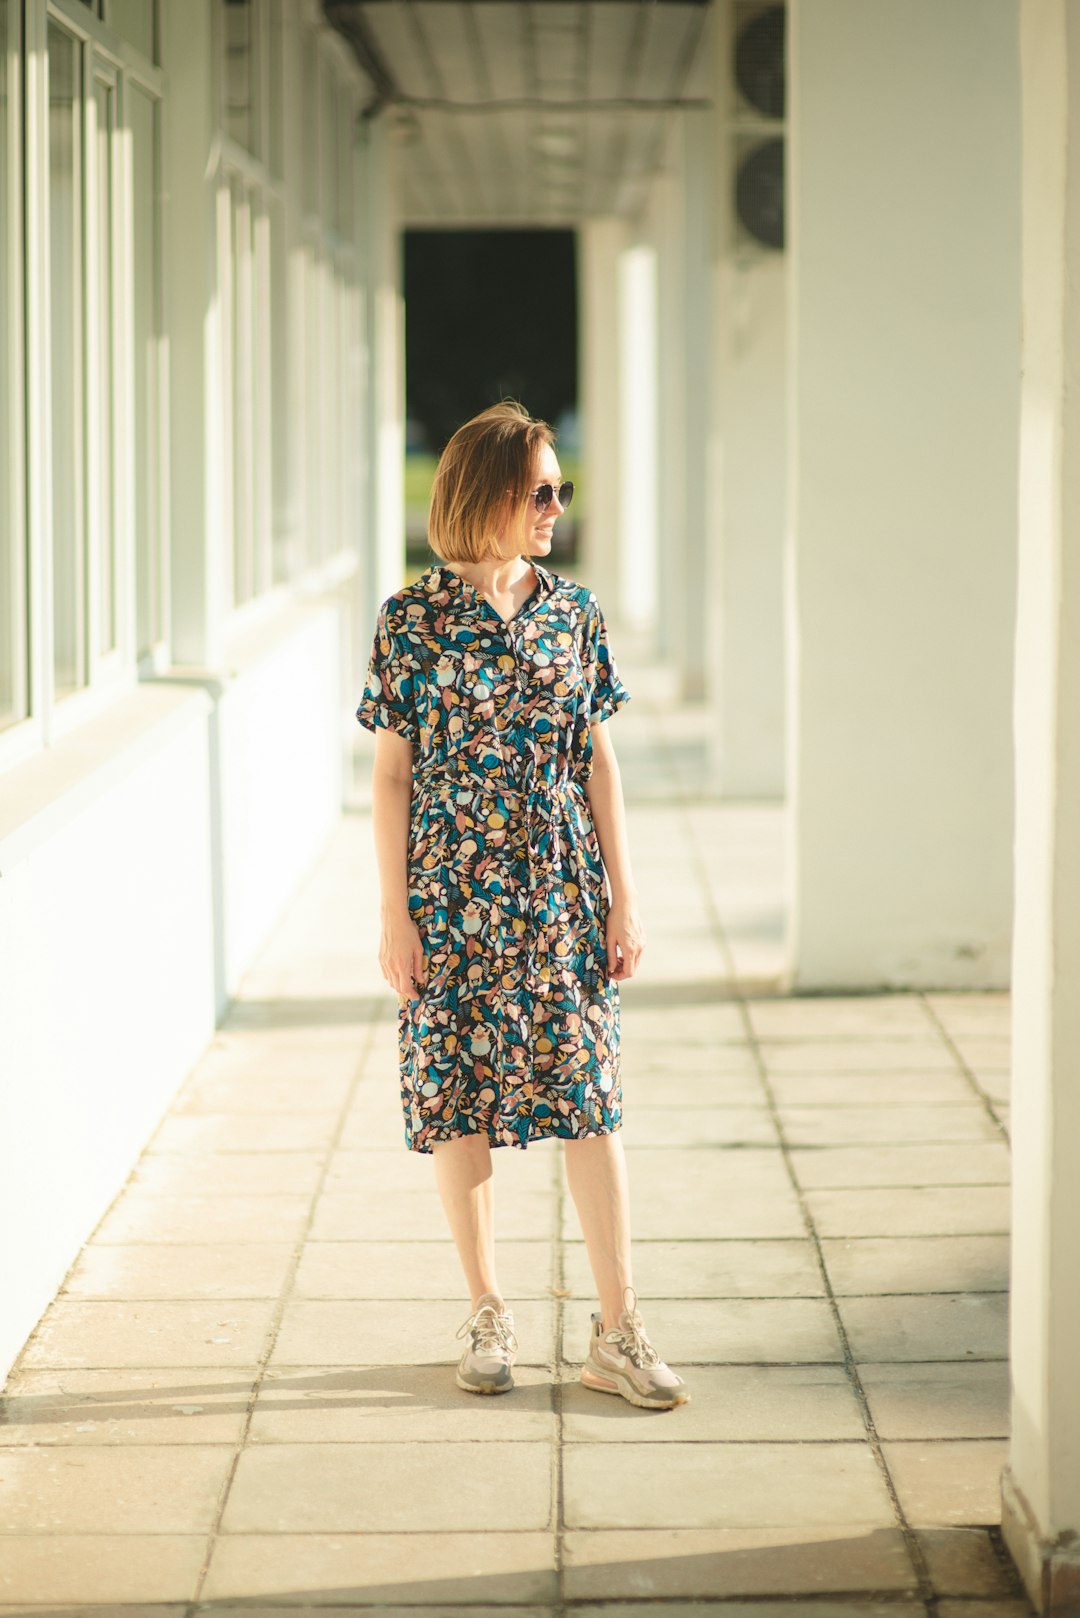 girl in blue and white floral dress standing on gray concrete floor